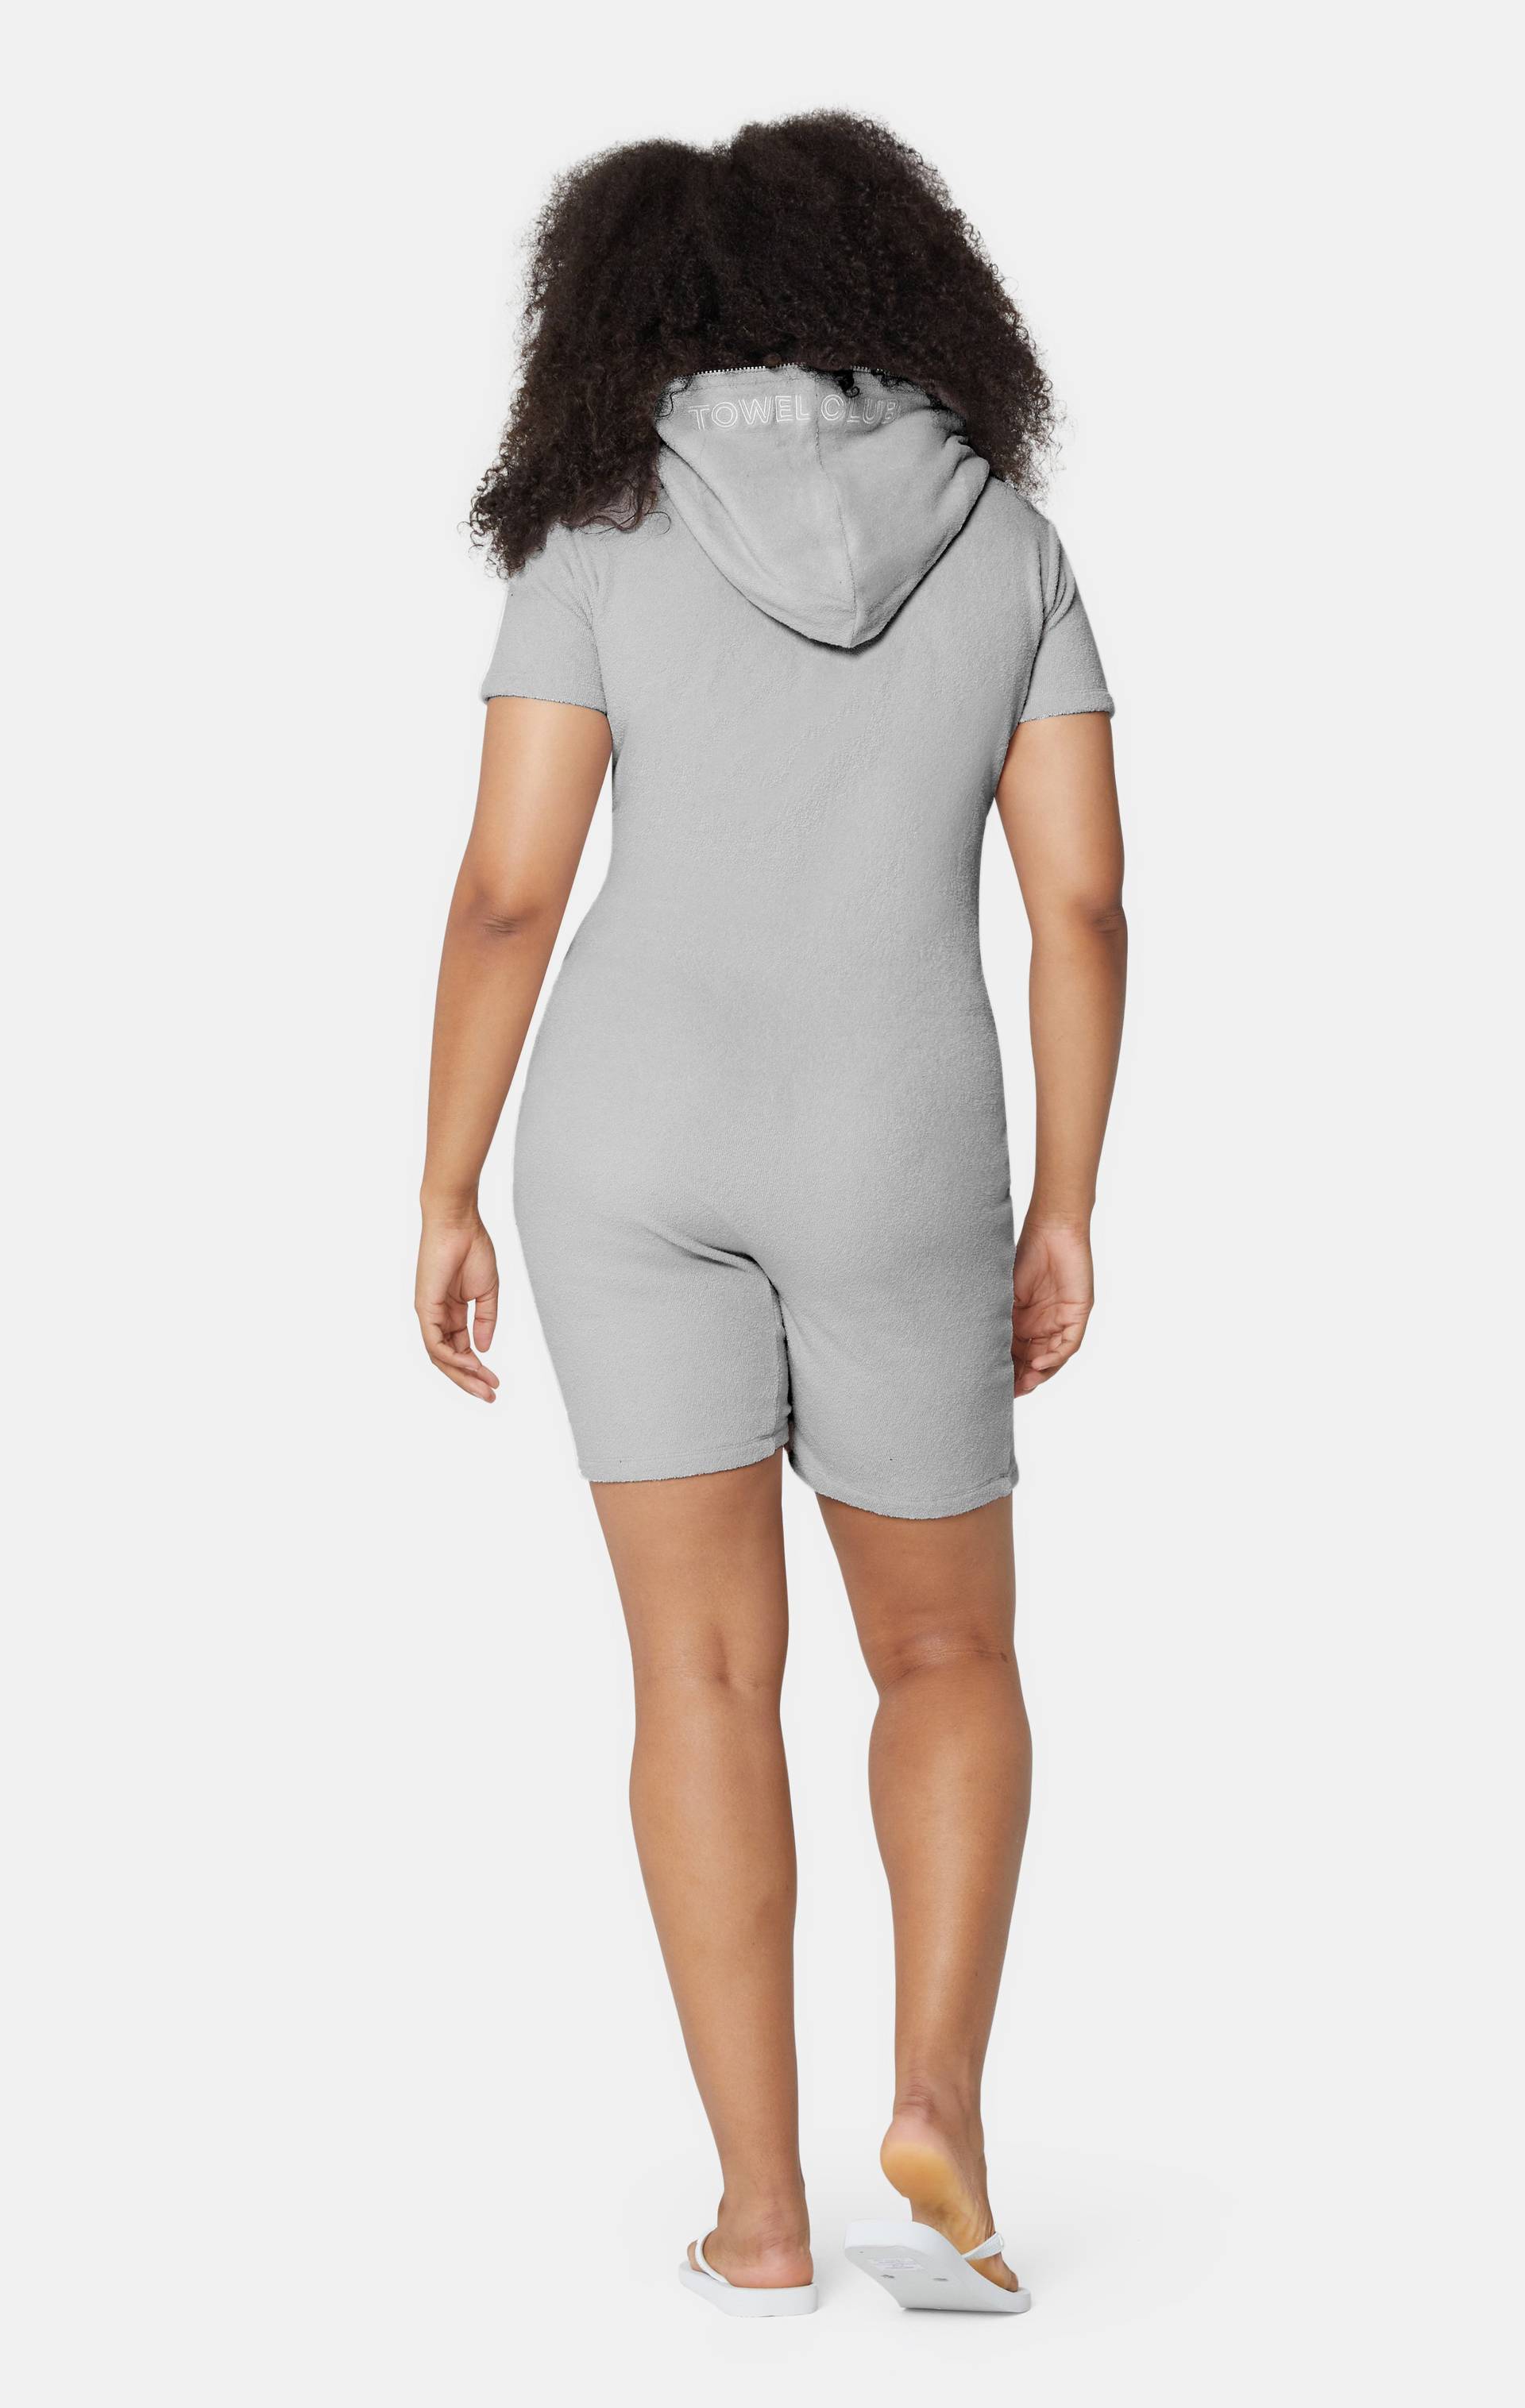 Onepiece Towel Club Fitted Short Jumpsuit Light Grey - 11